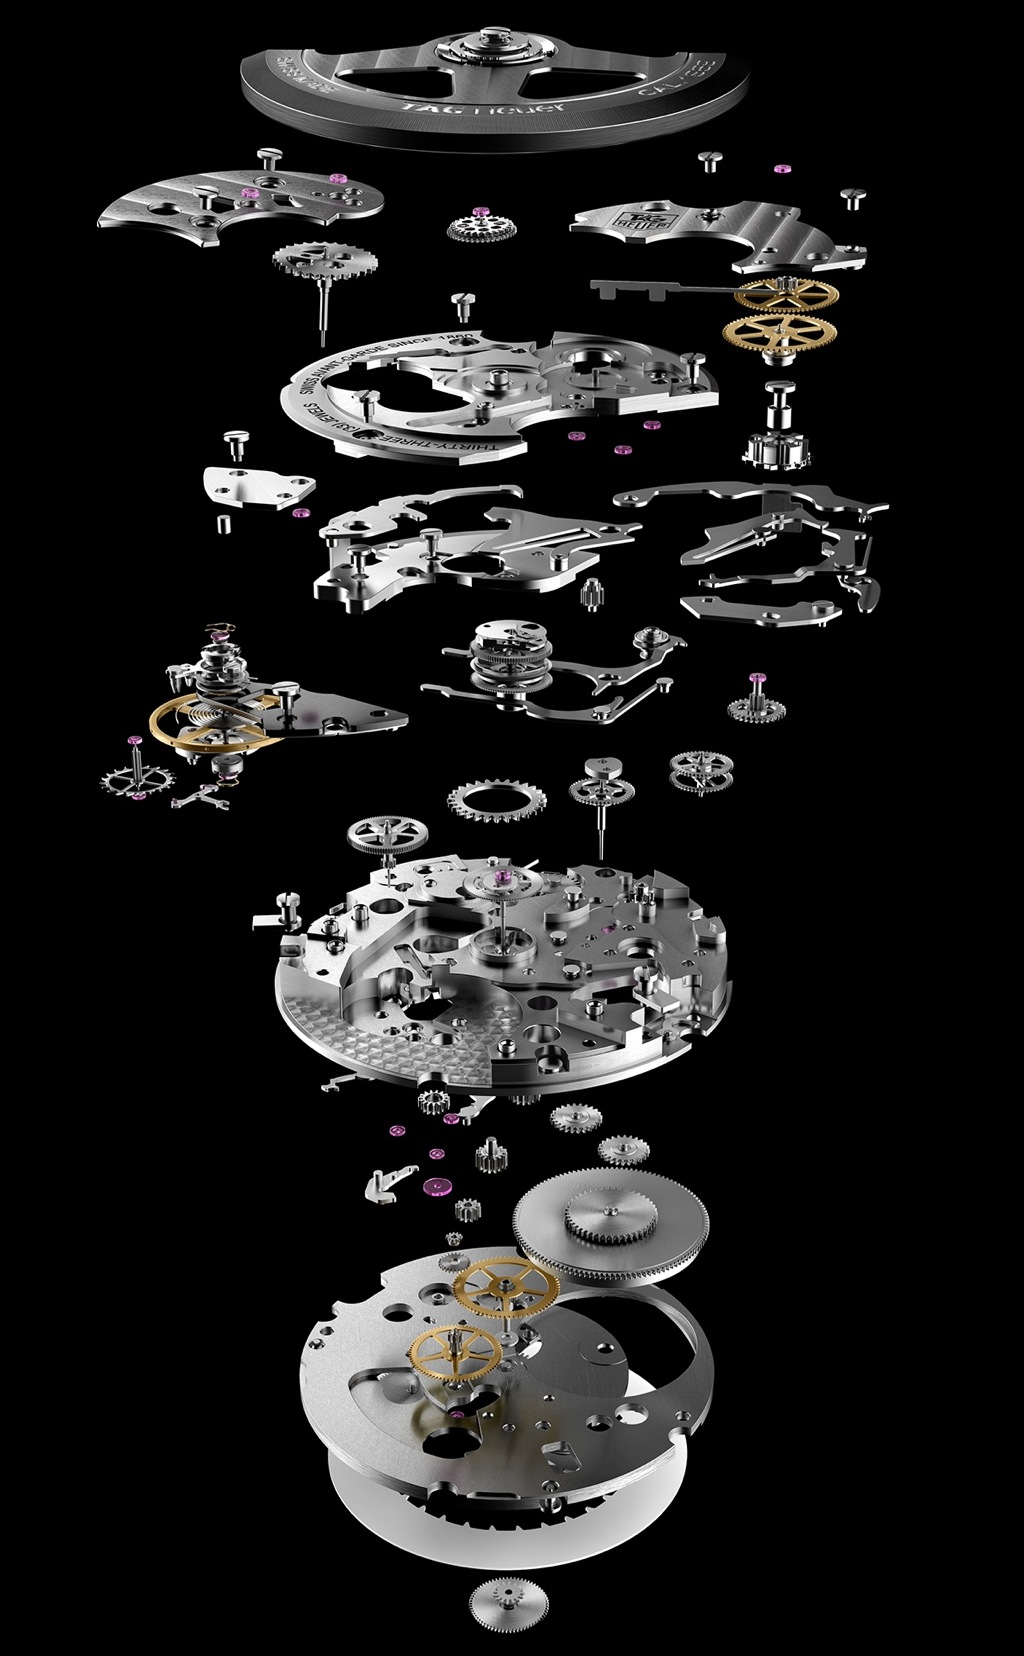 Watch Movement Exploded View